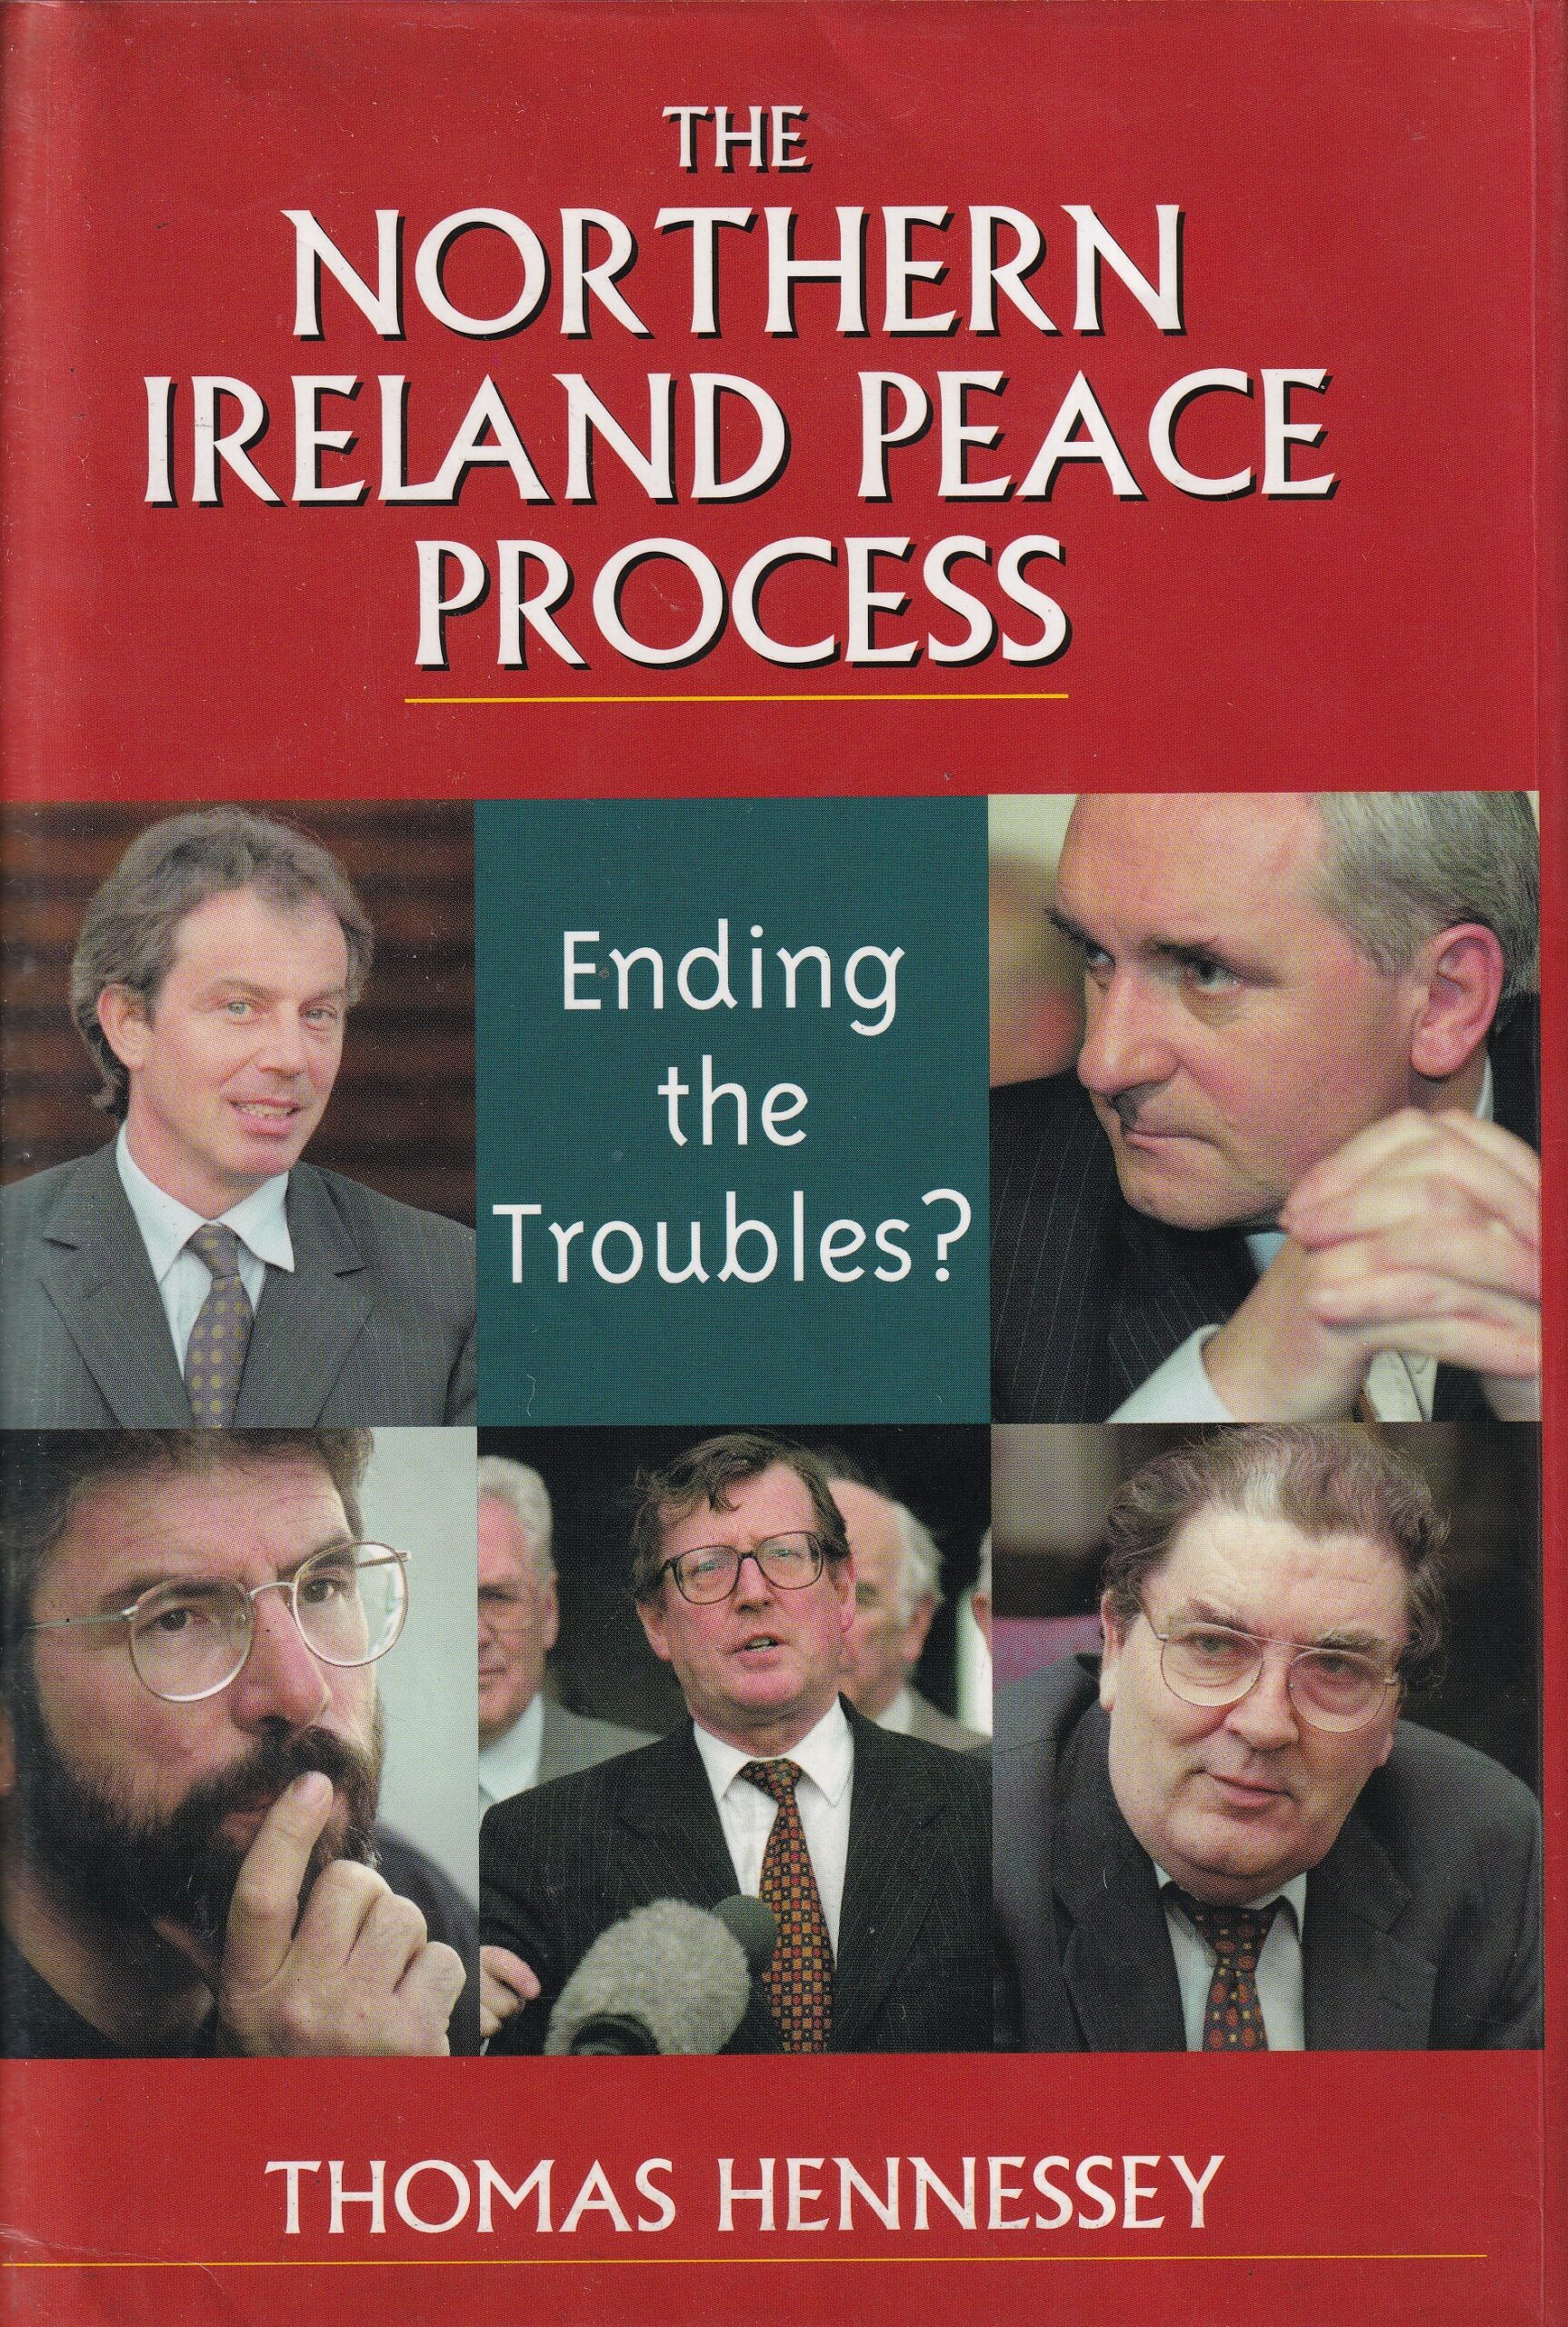 The Northern Ireland Peace Process: Ending the Troubles? | Thomas Hennessey | Charlie Byrne's